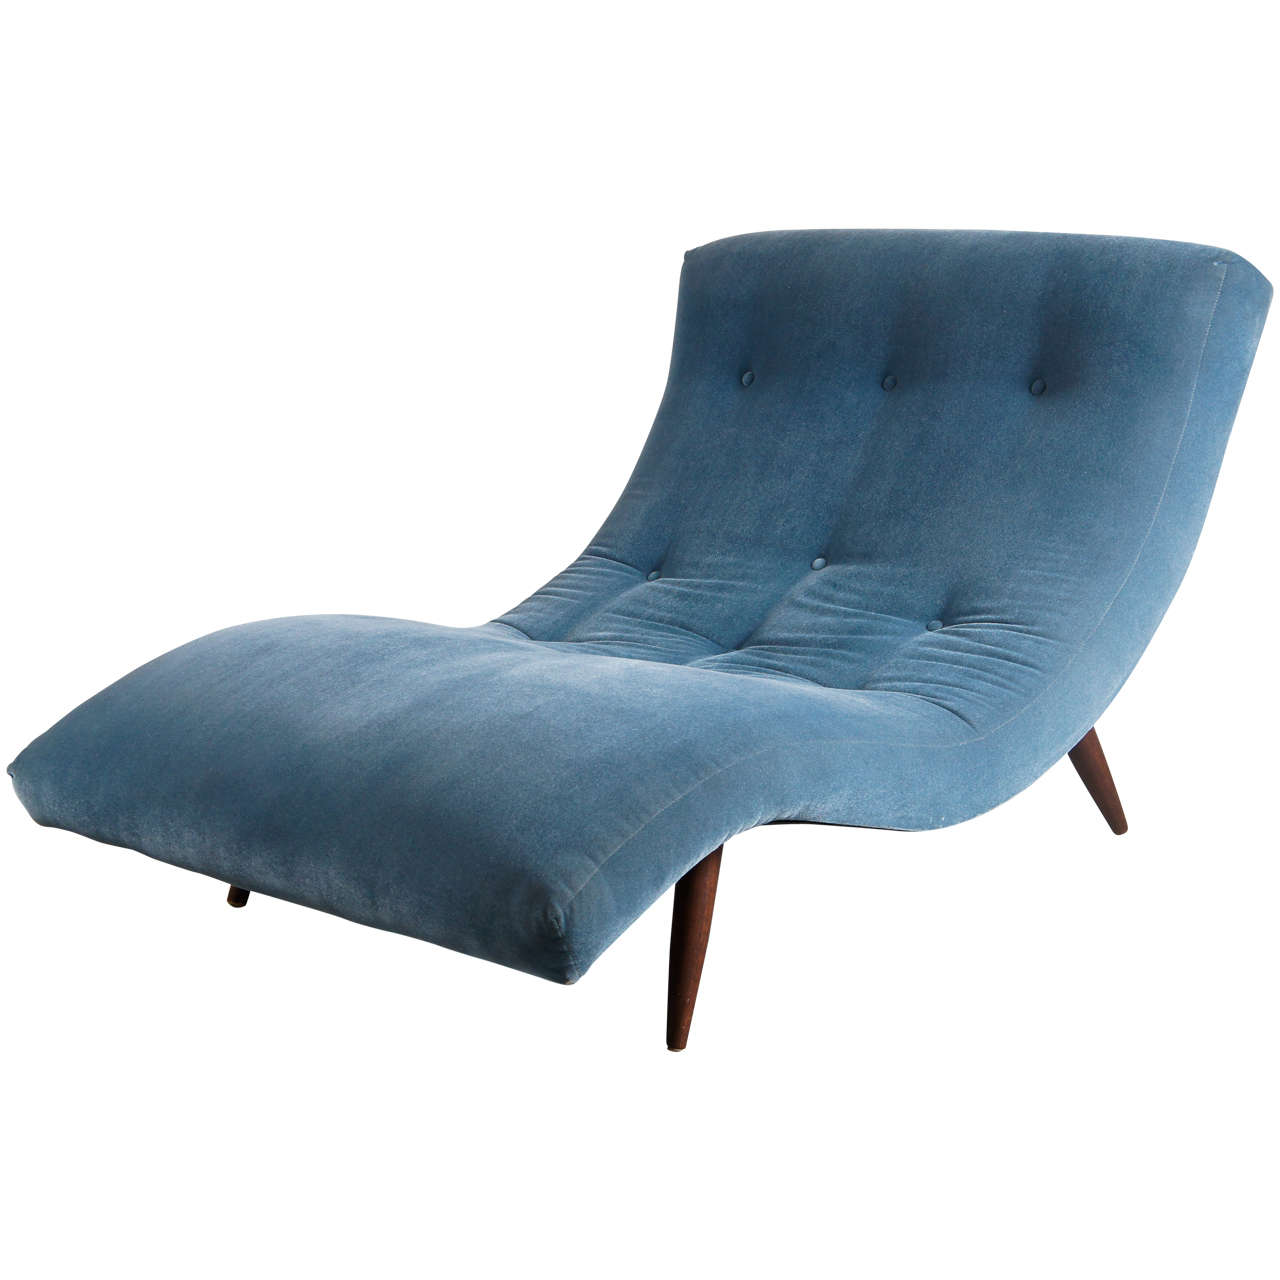 60's Adrian Pearsall Chaise Lounge